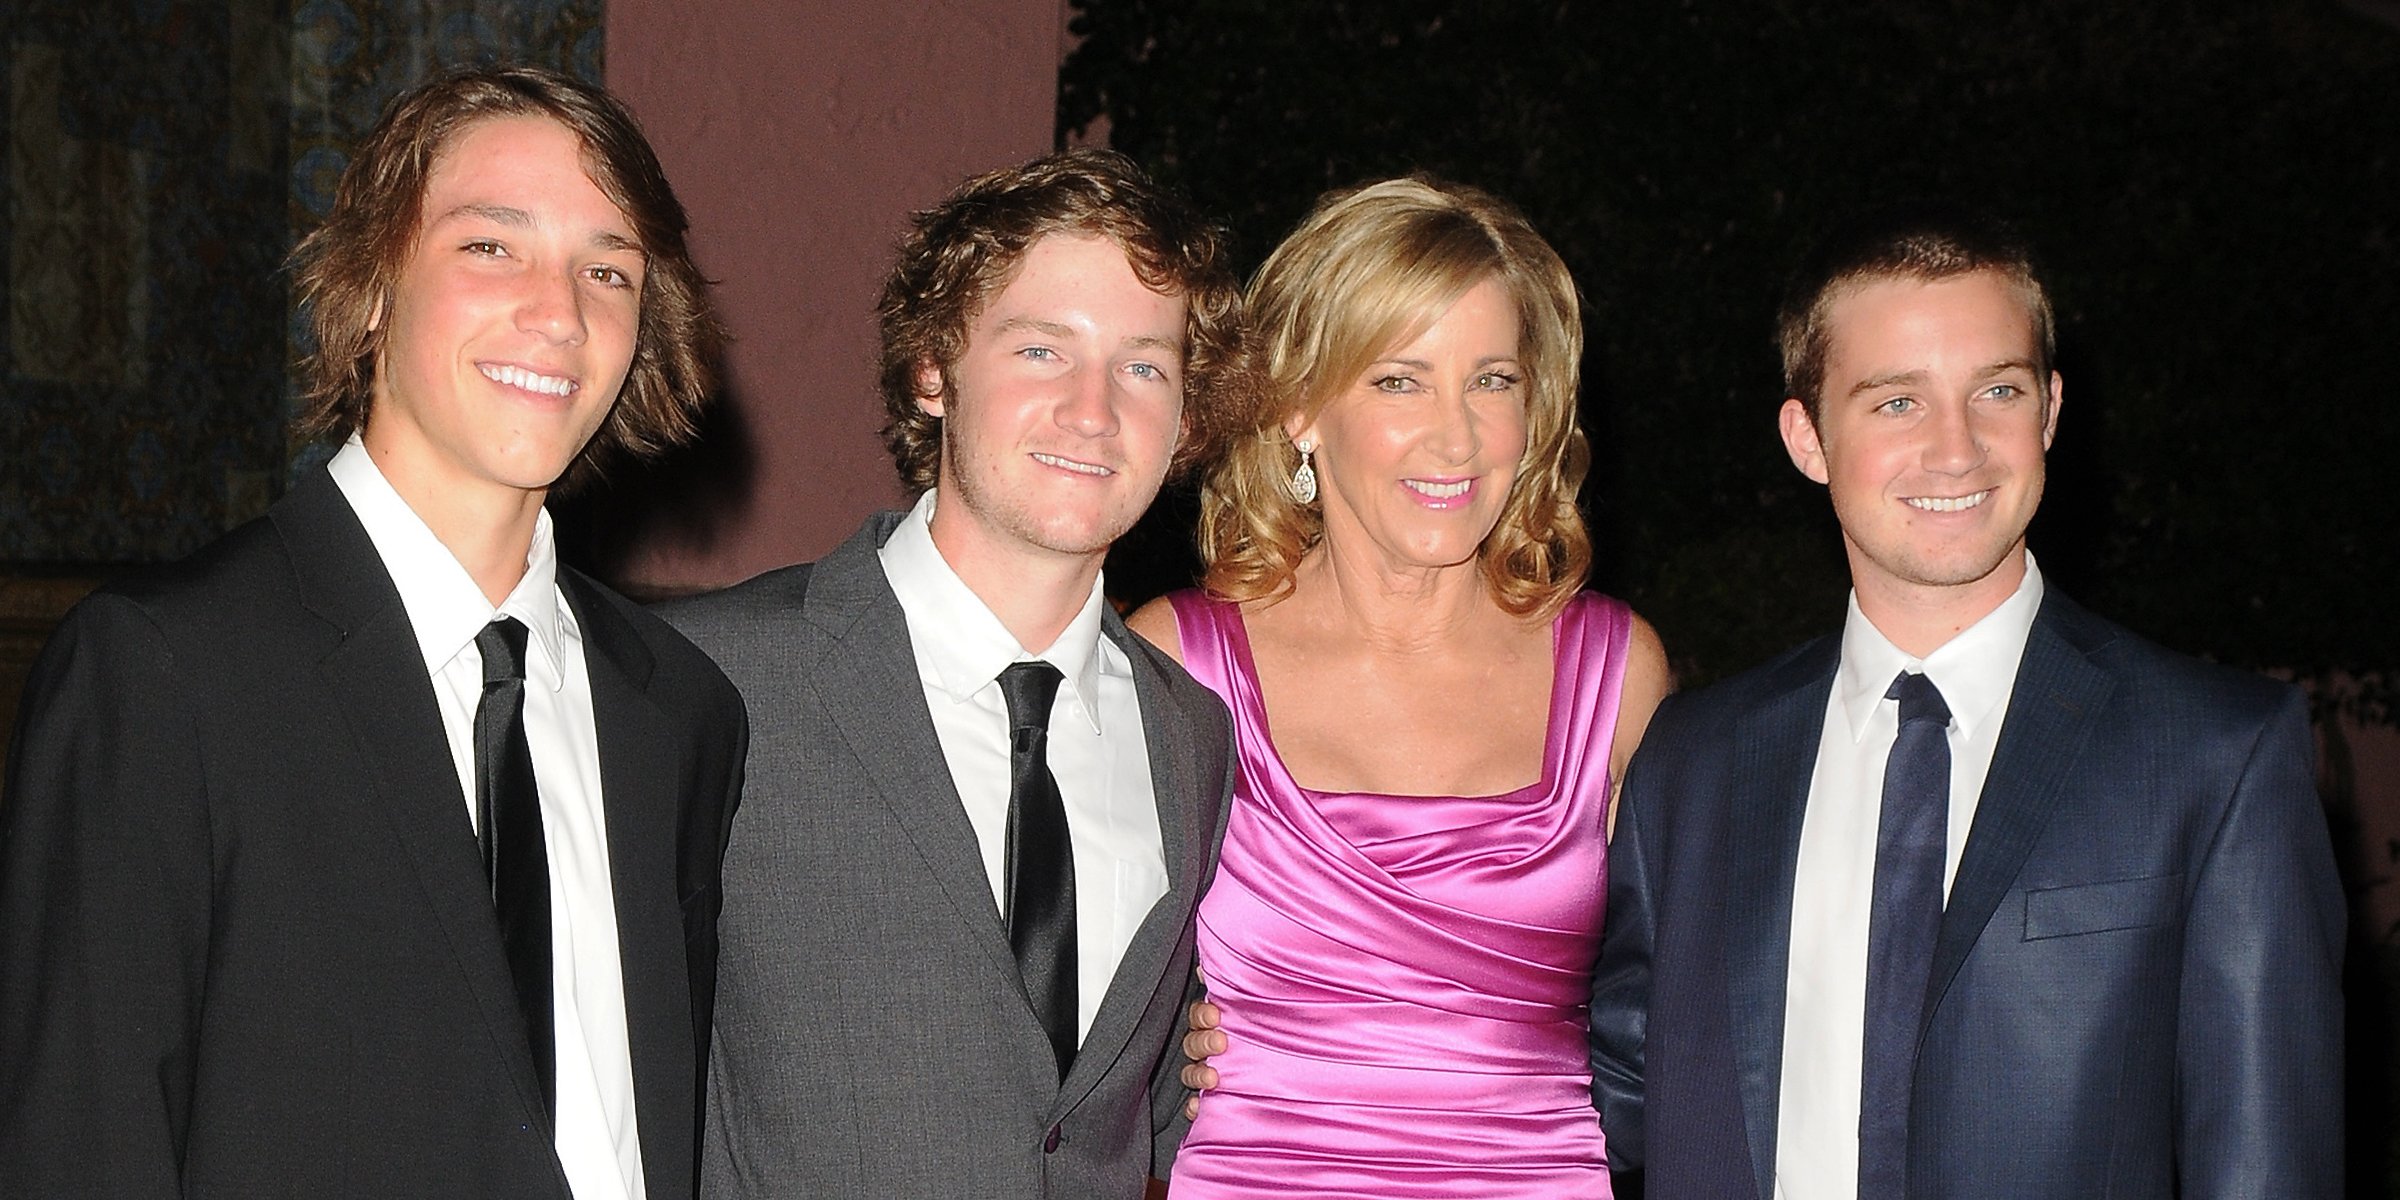 Chris Evert's Children The Tennis Legend Has Three Sons from Her